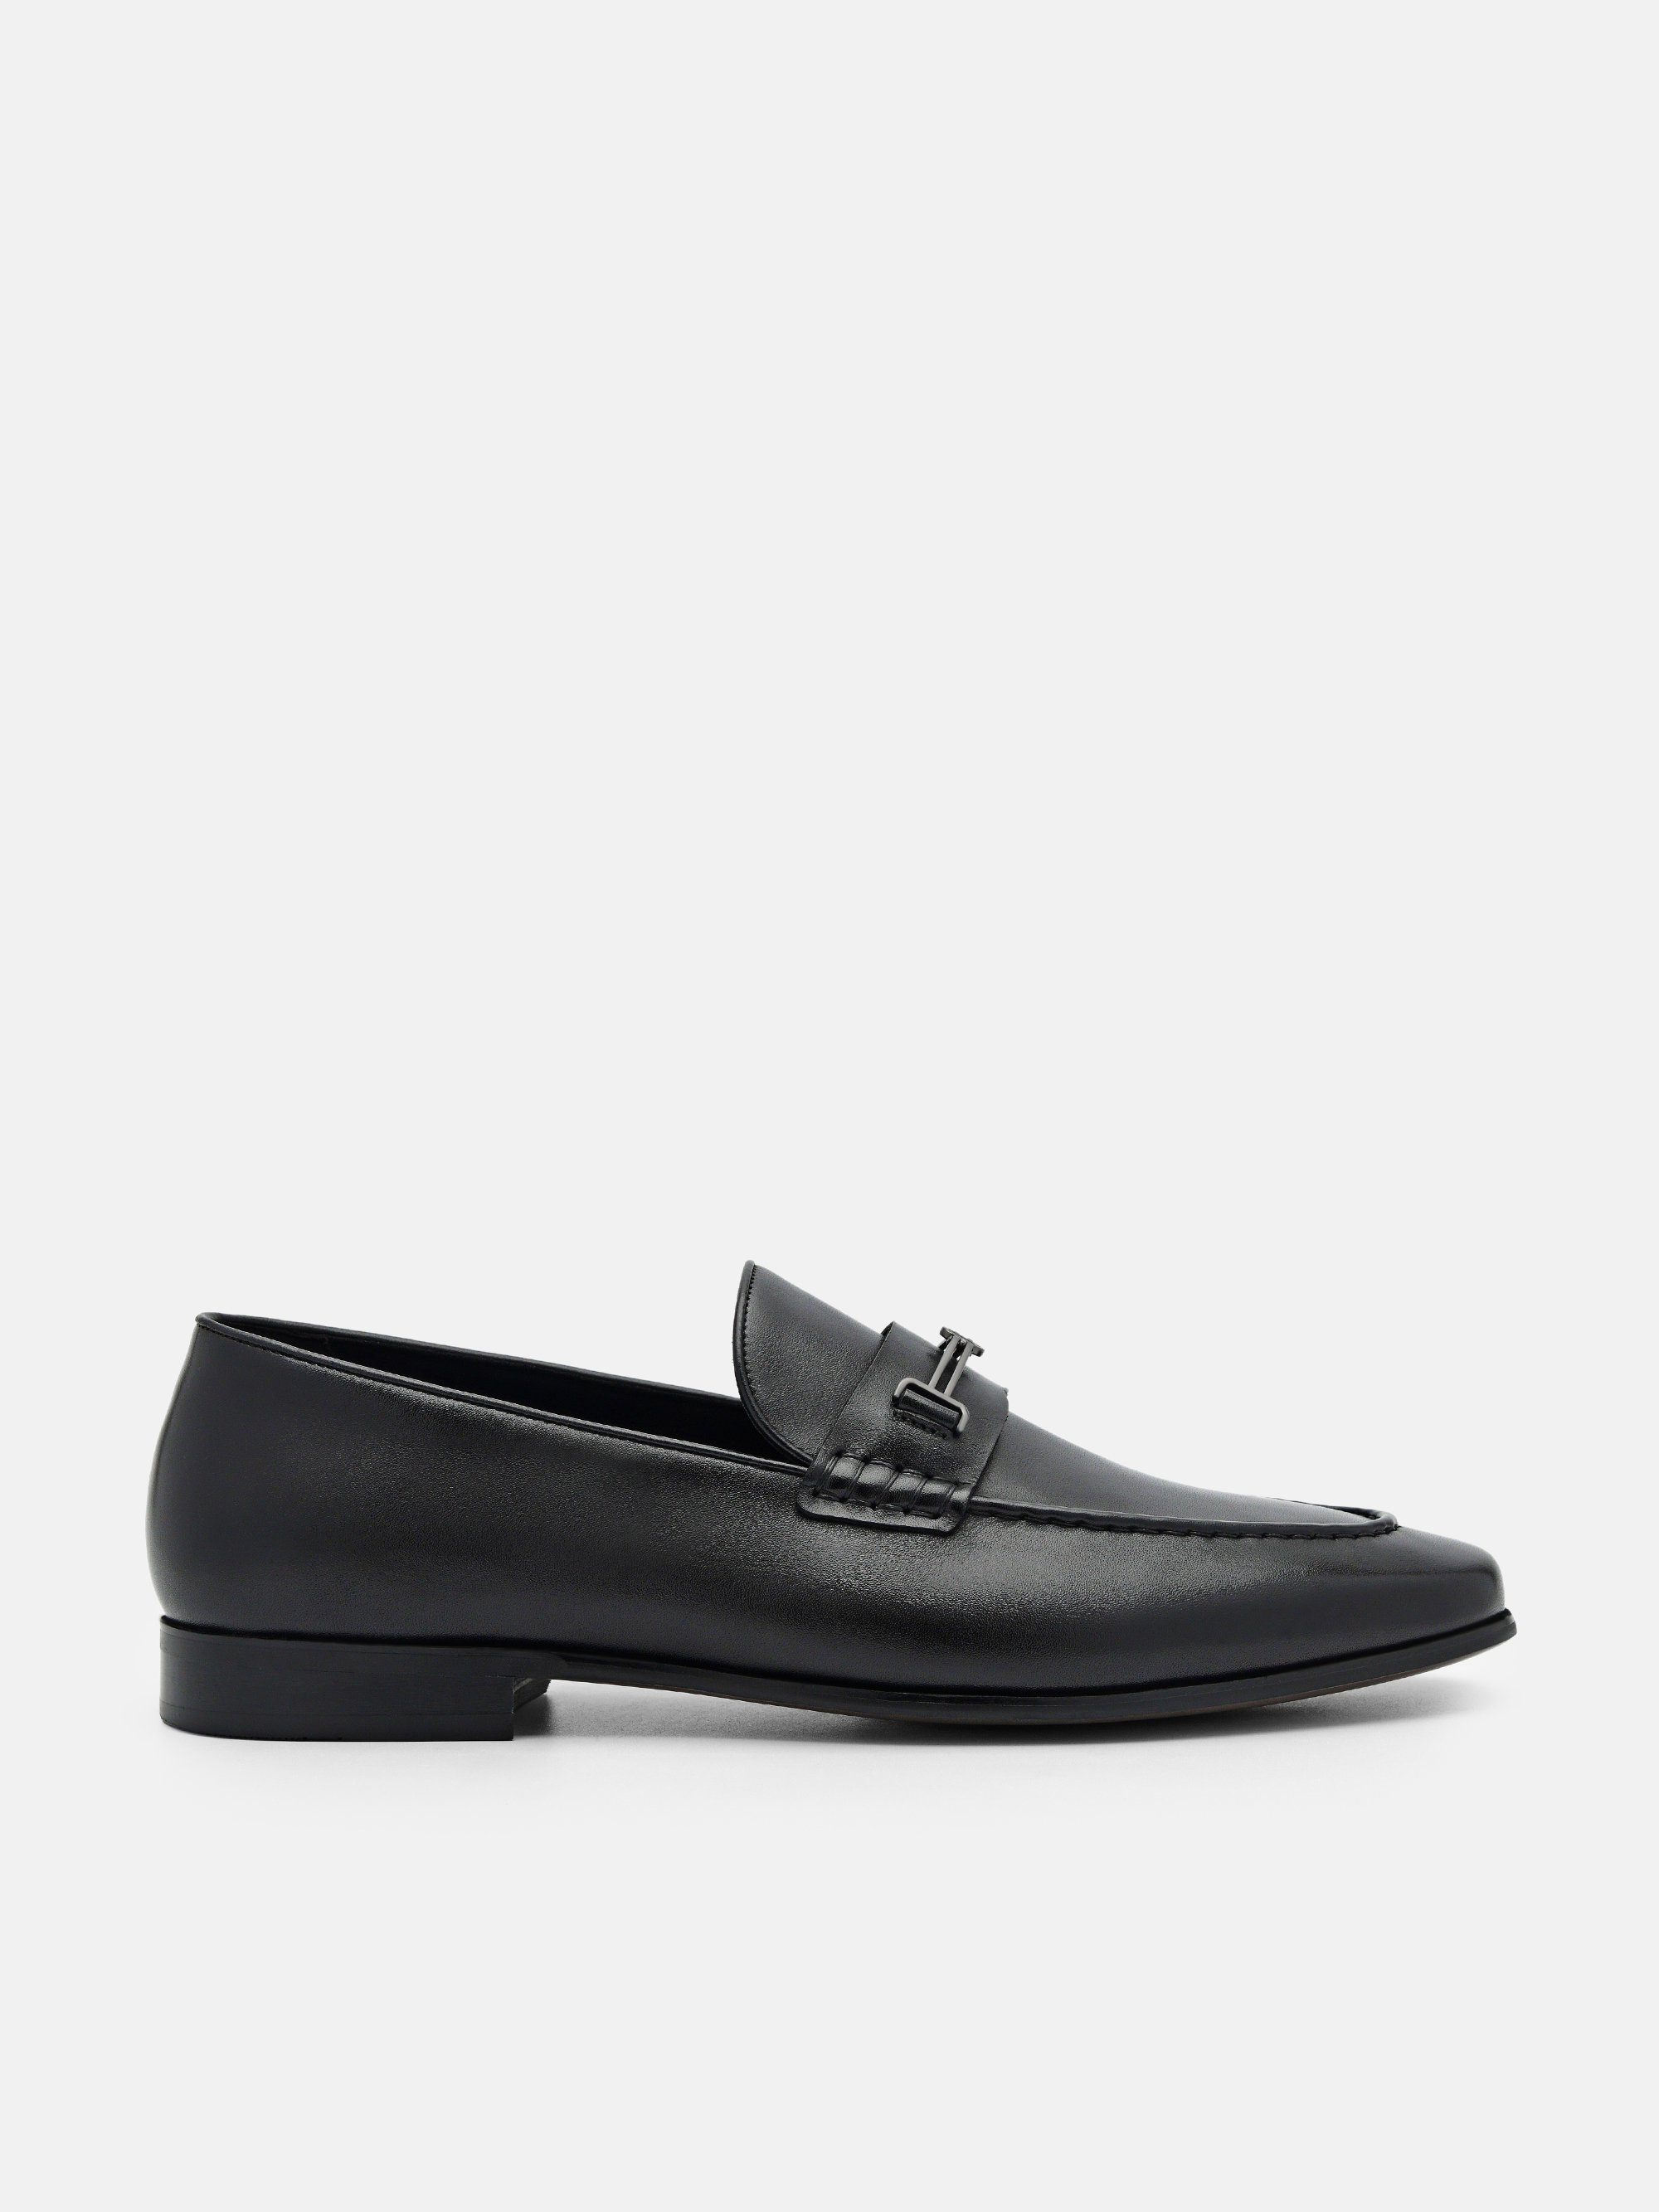 Black Anthony Leather Loafers - PEDRO SG